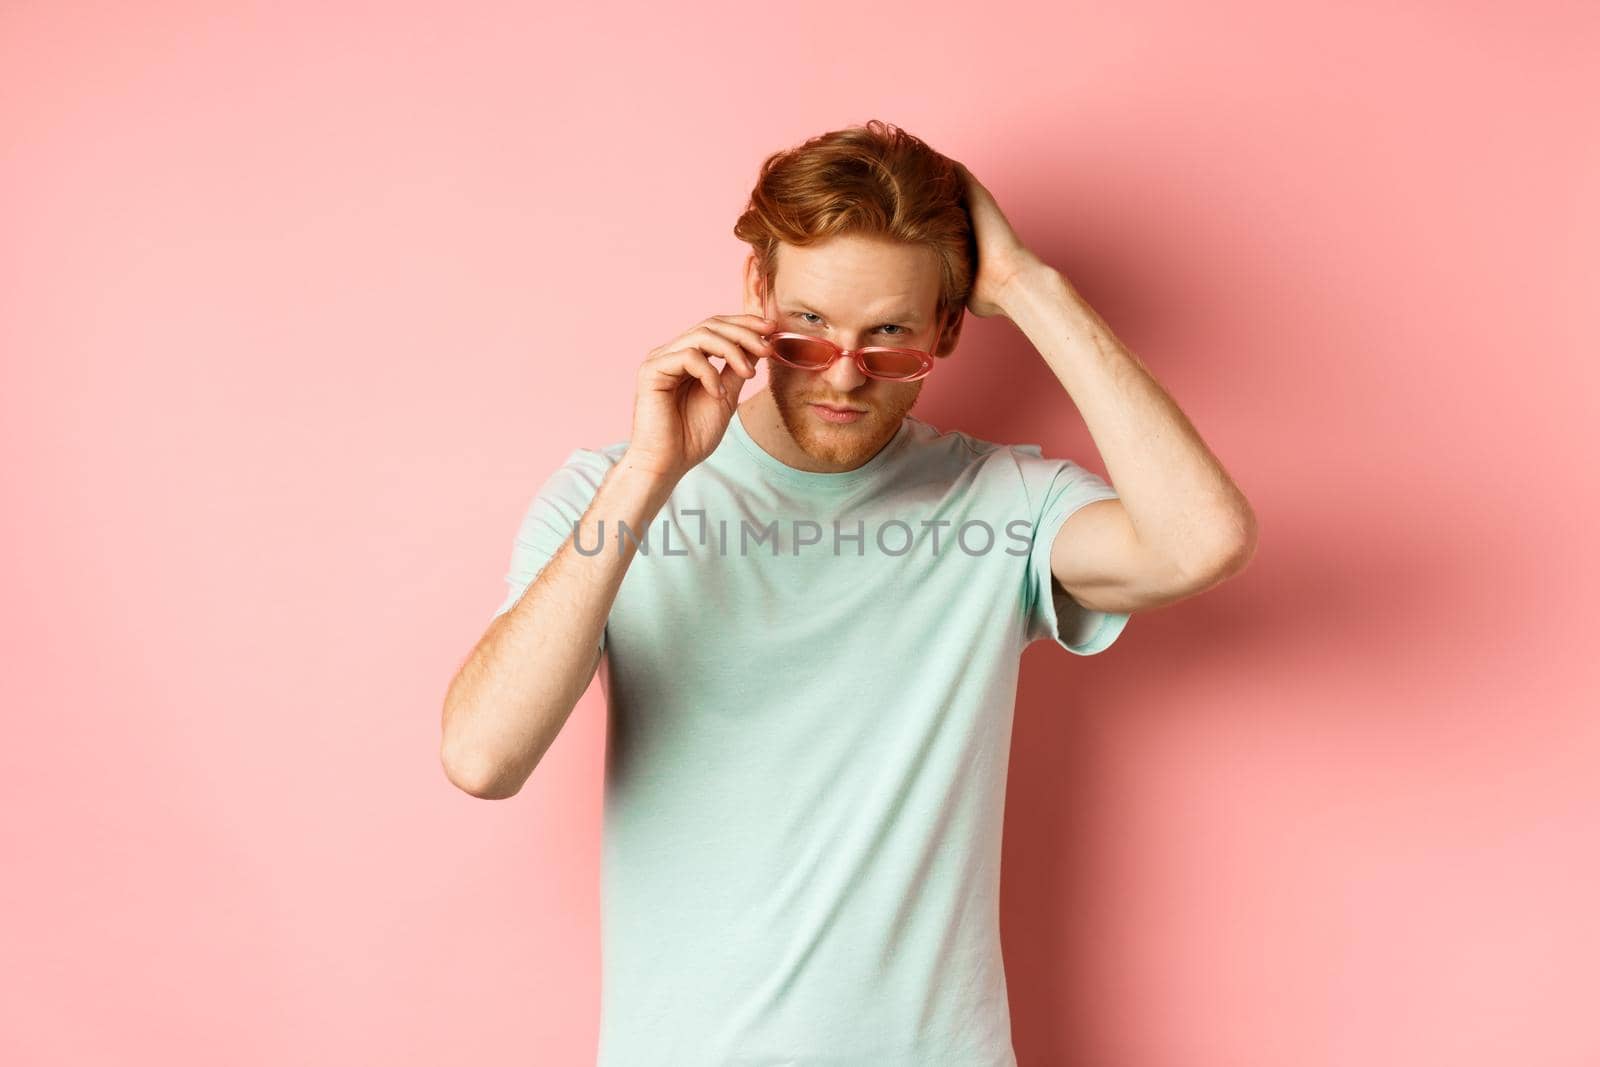 Handsome young redhead man in sunglasses, brushing hair with hand and looking smug and confident at camera, standing over pink background.